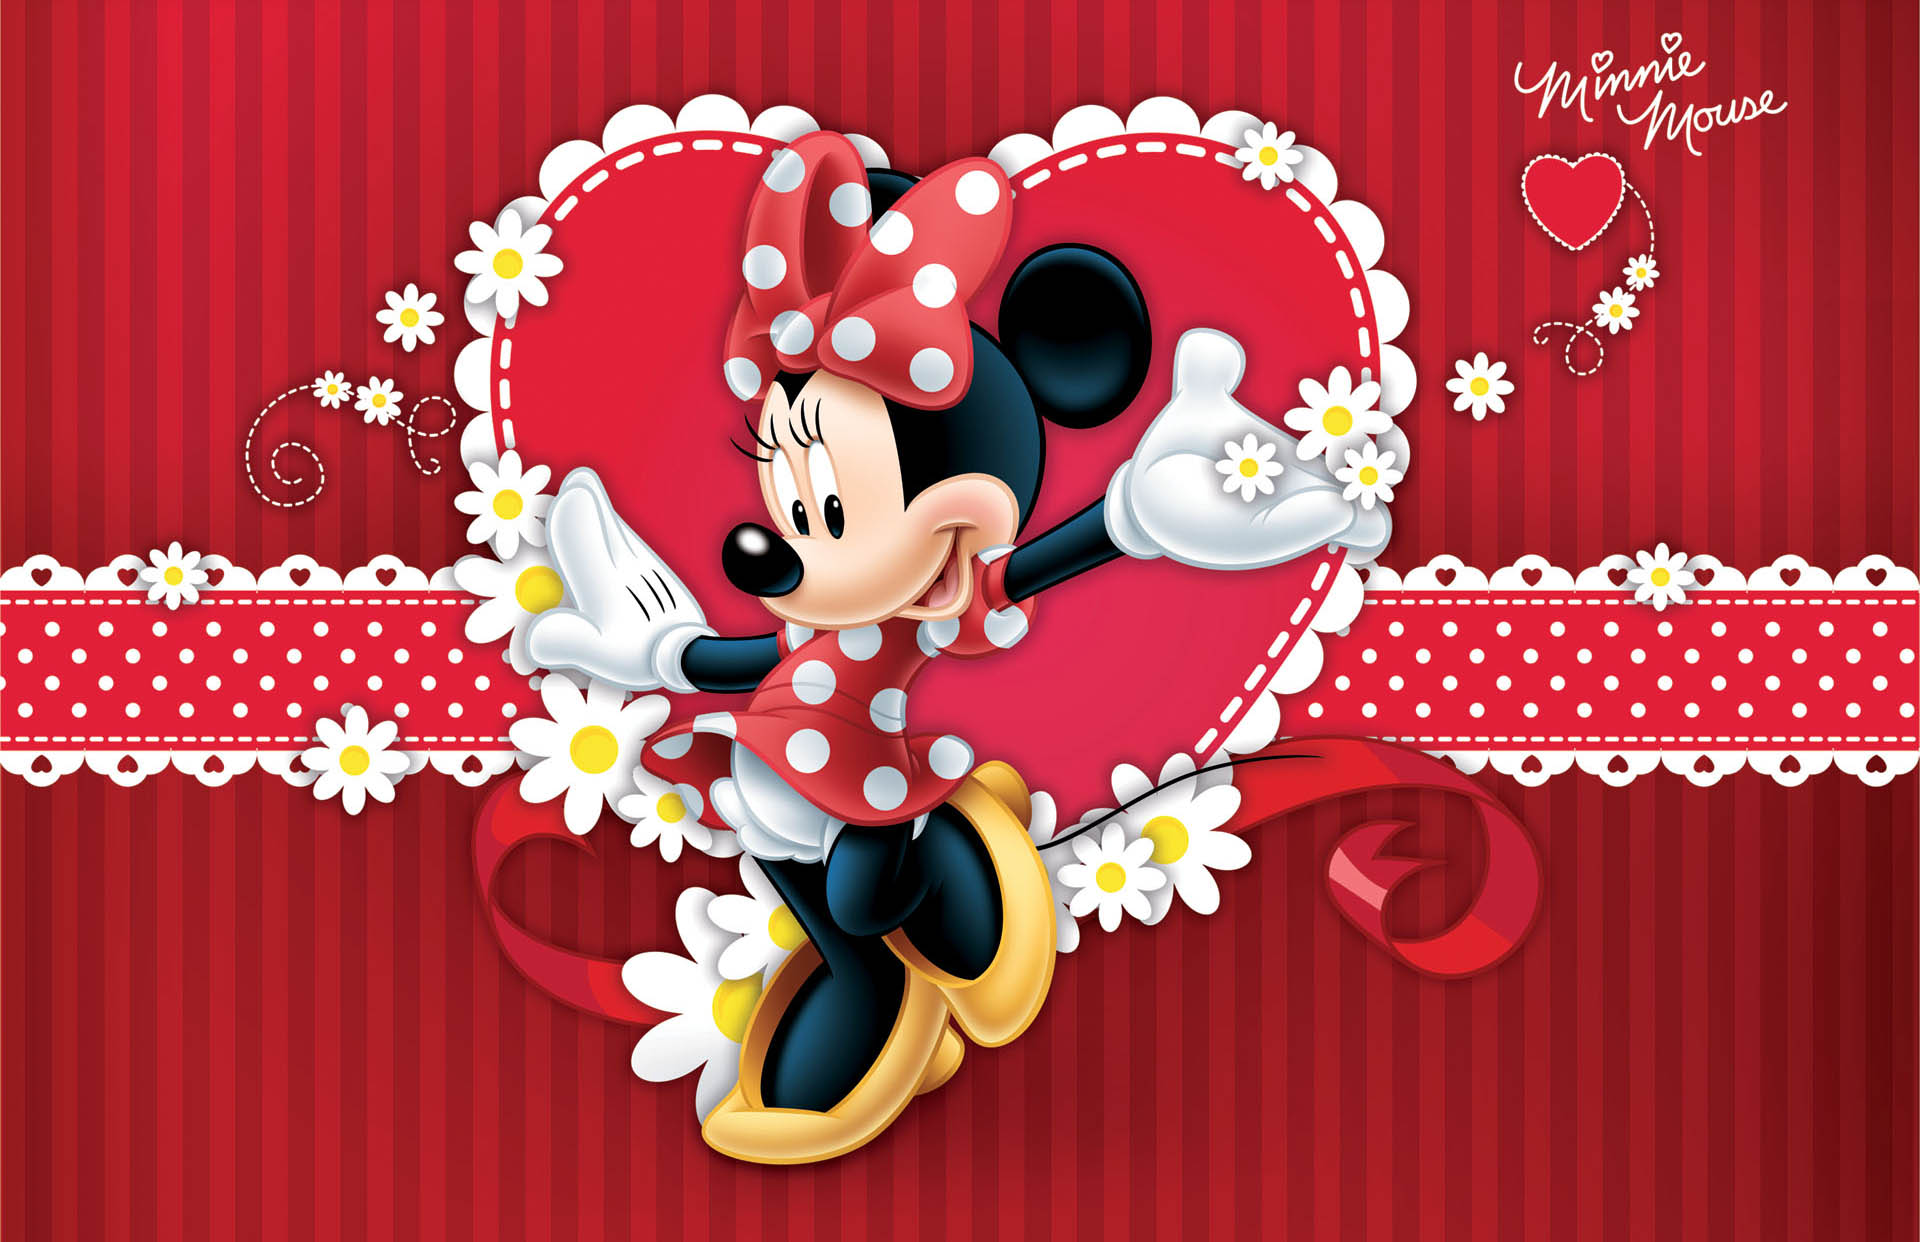 Free download Minnie Mouse Wallpapers Desktop [for your